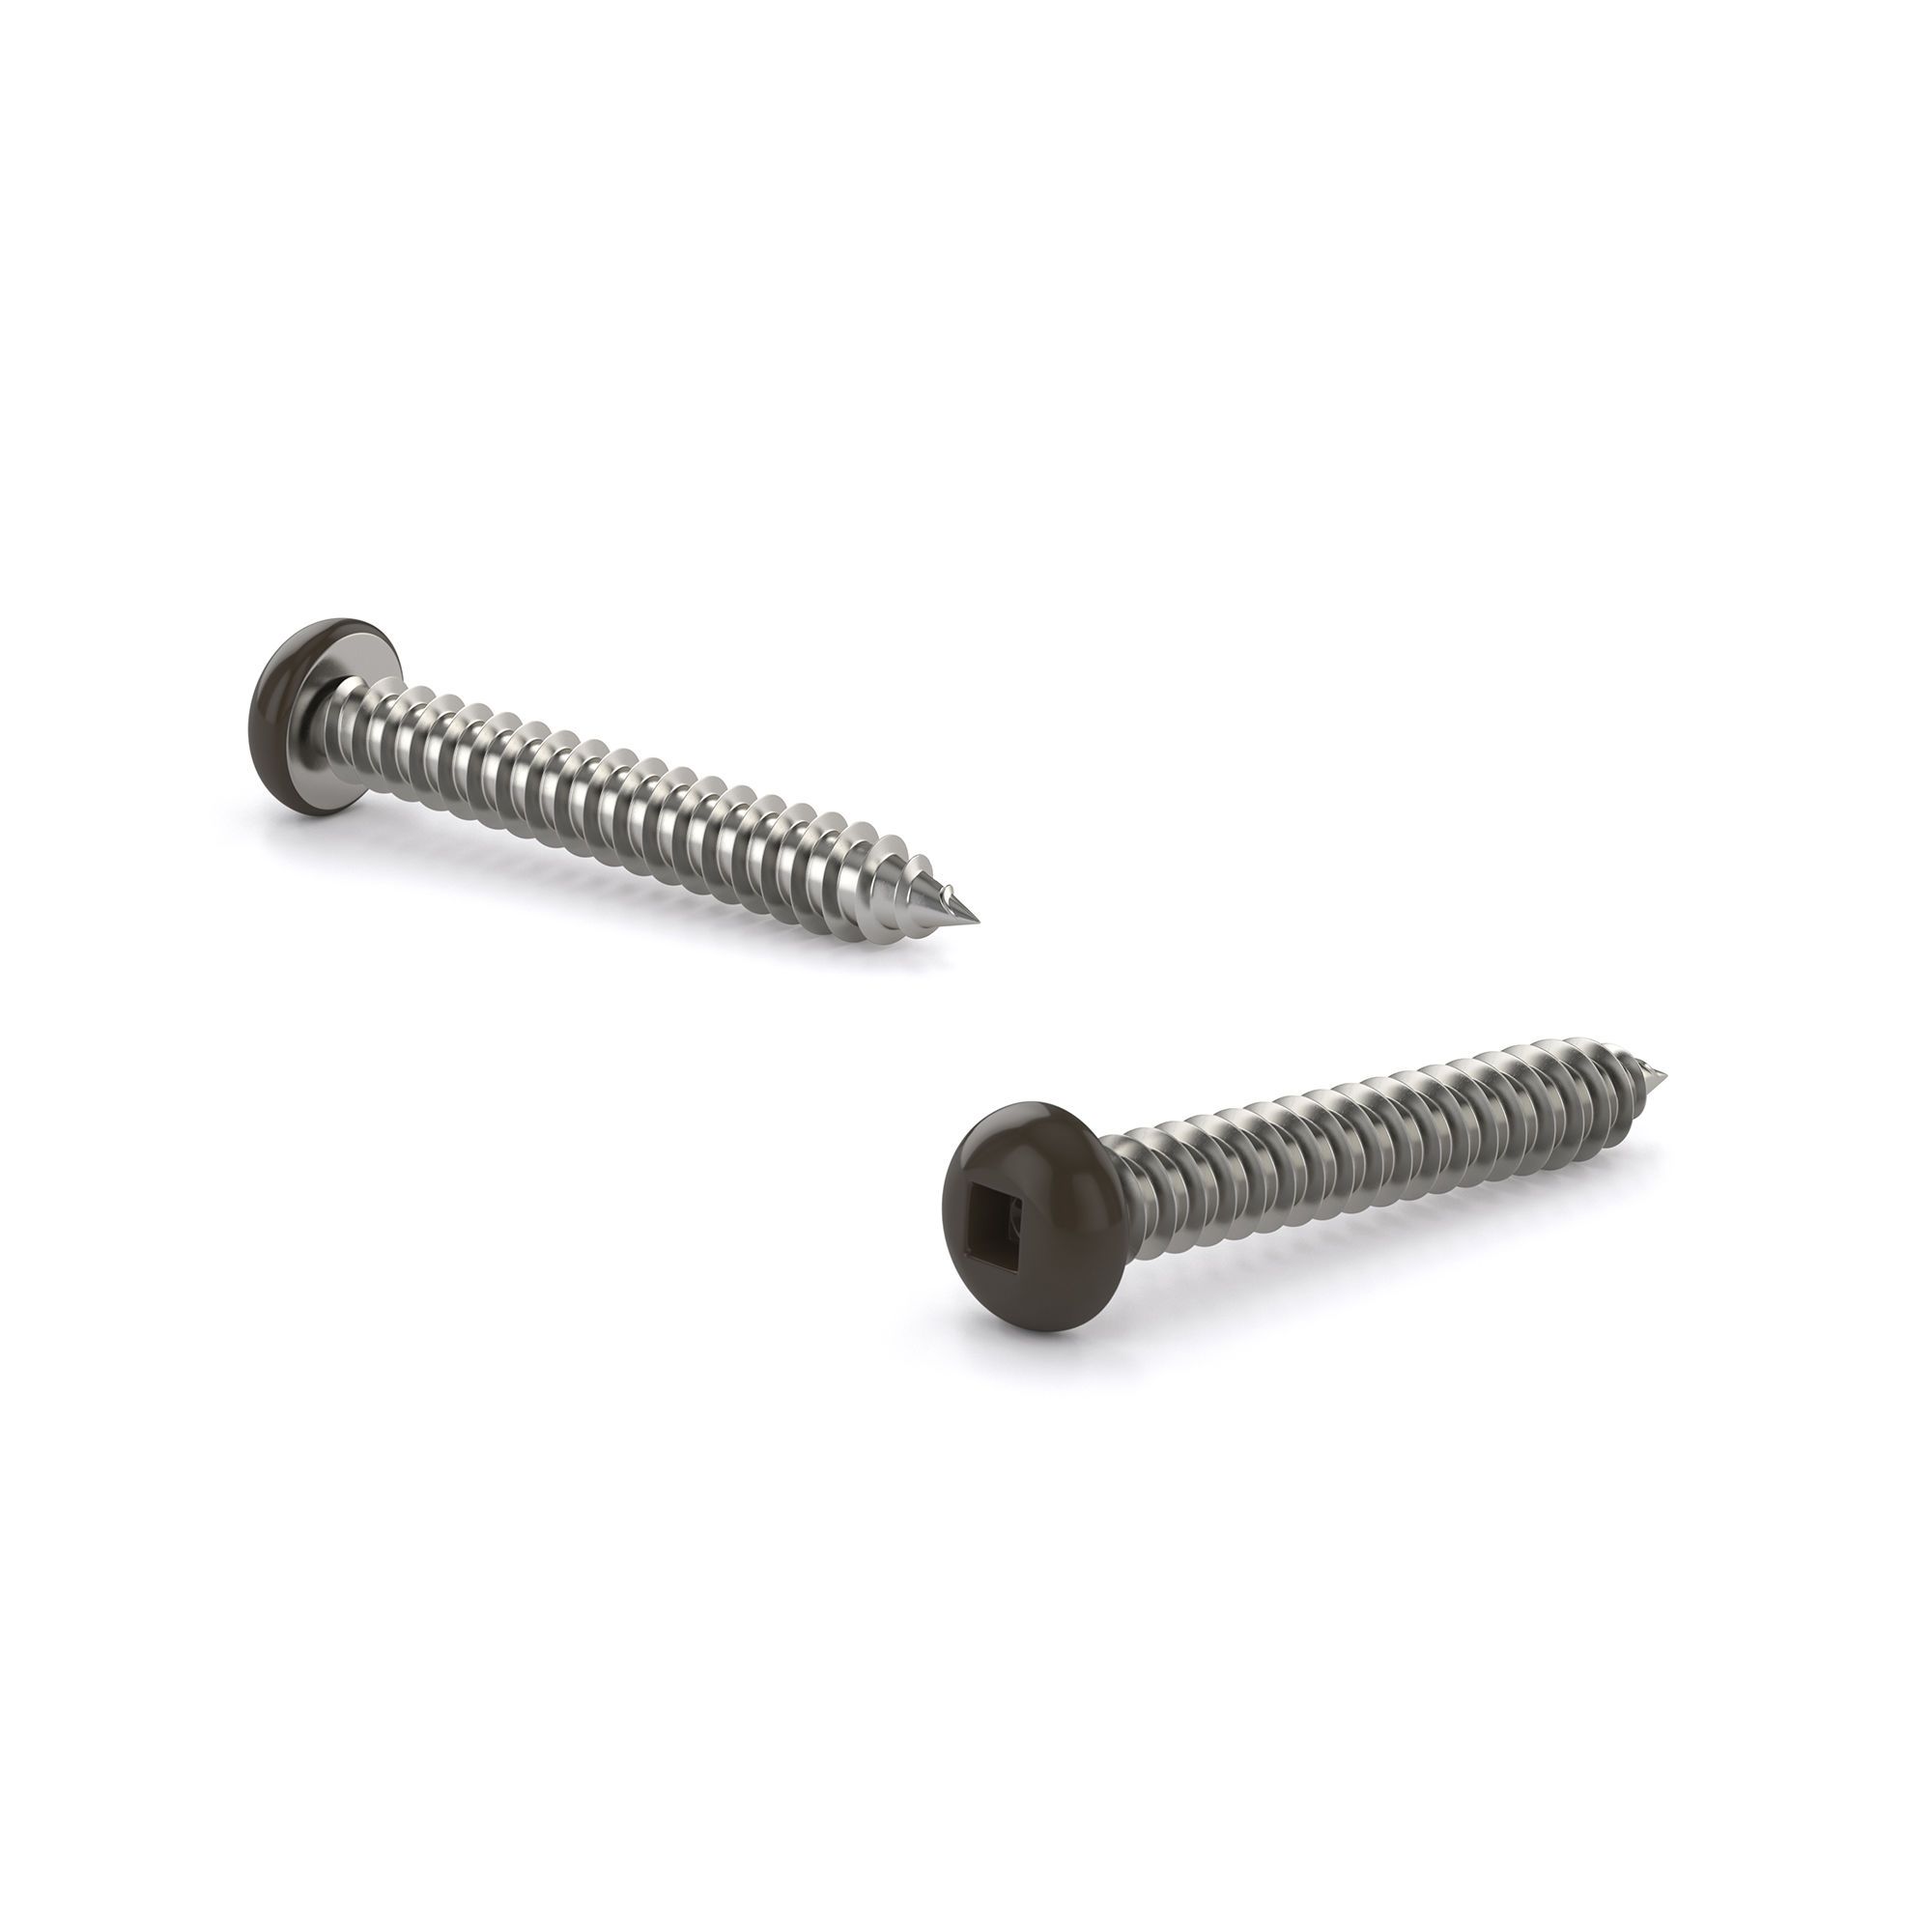 Wood Screw #8 White Pan Washer, Square Drive